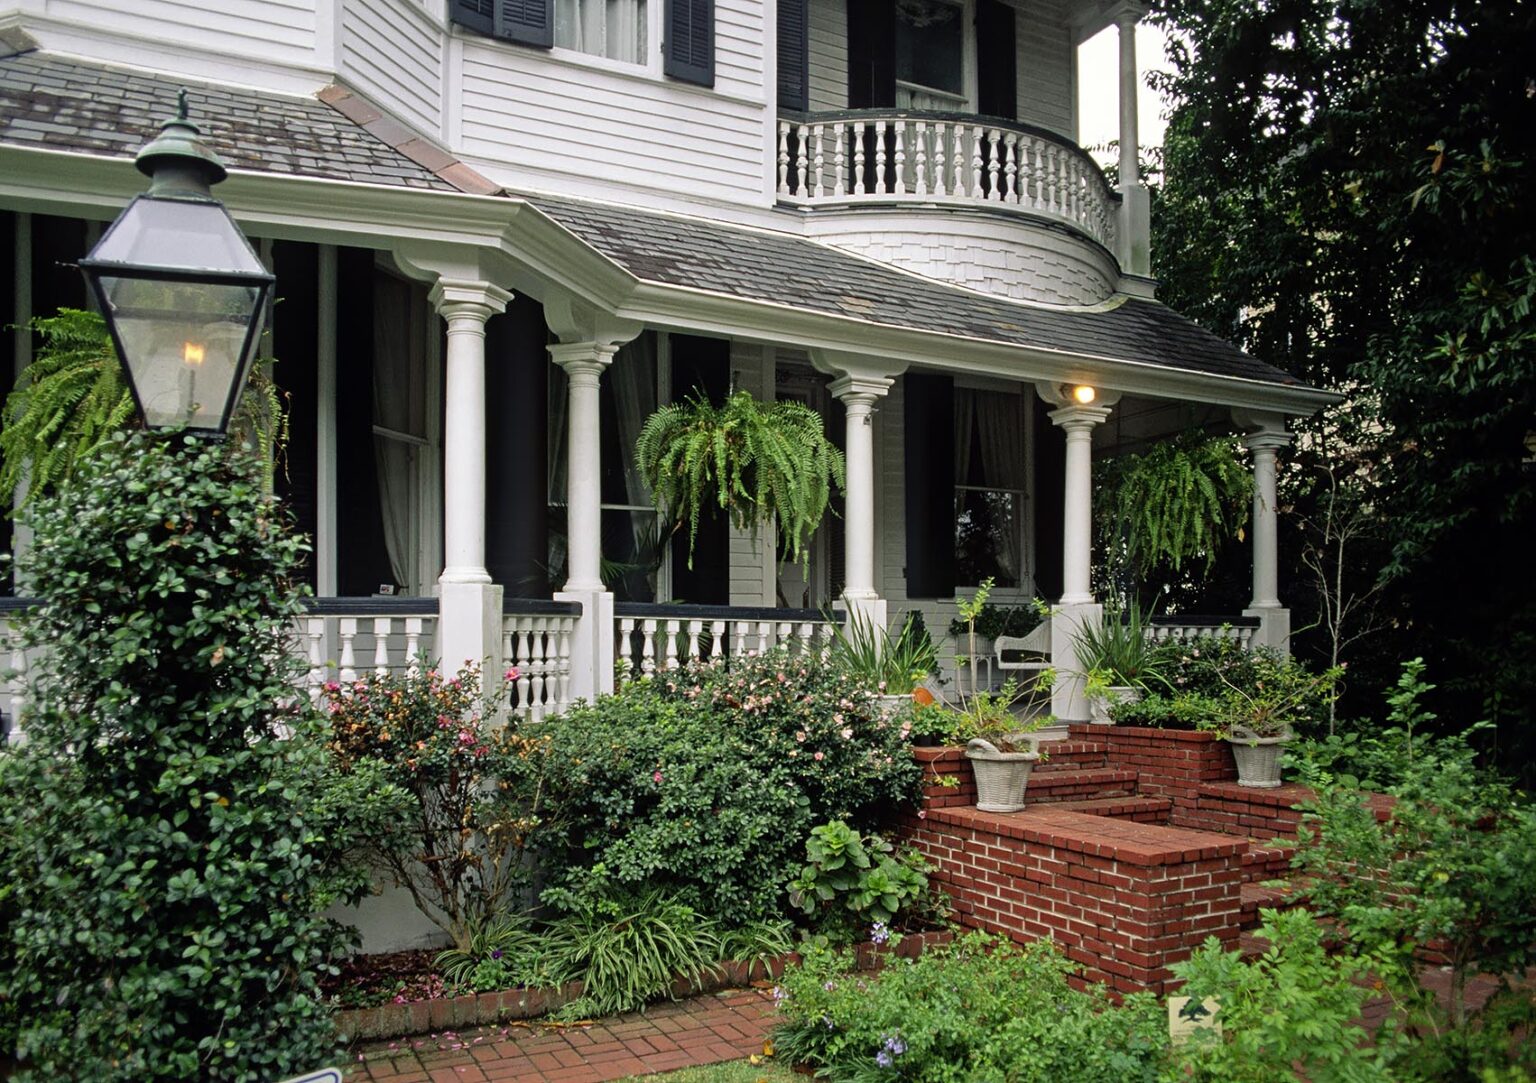 PORCH & garden of a Southern Style MANSION in the GARDEN DISTRICT - NEW ORLEANS, LOUISIANA